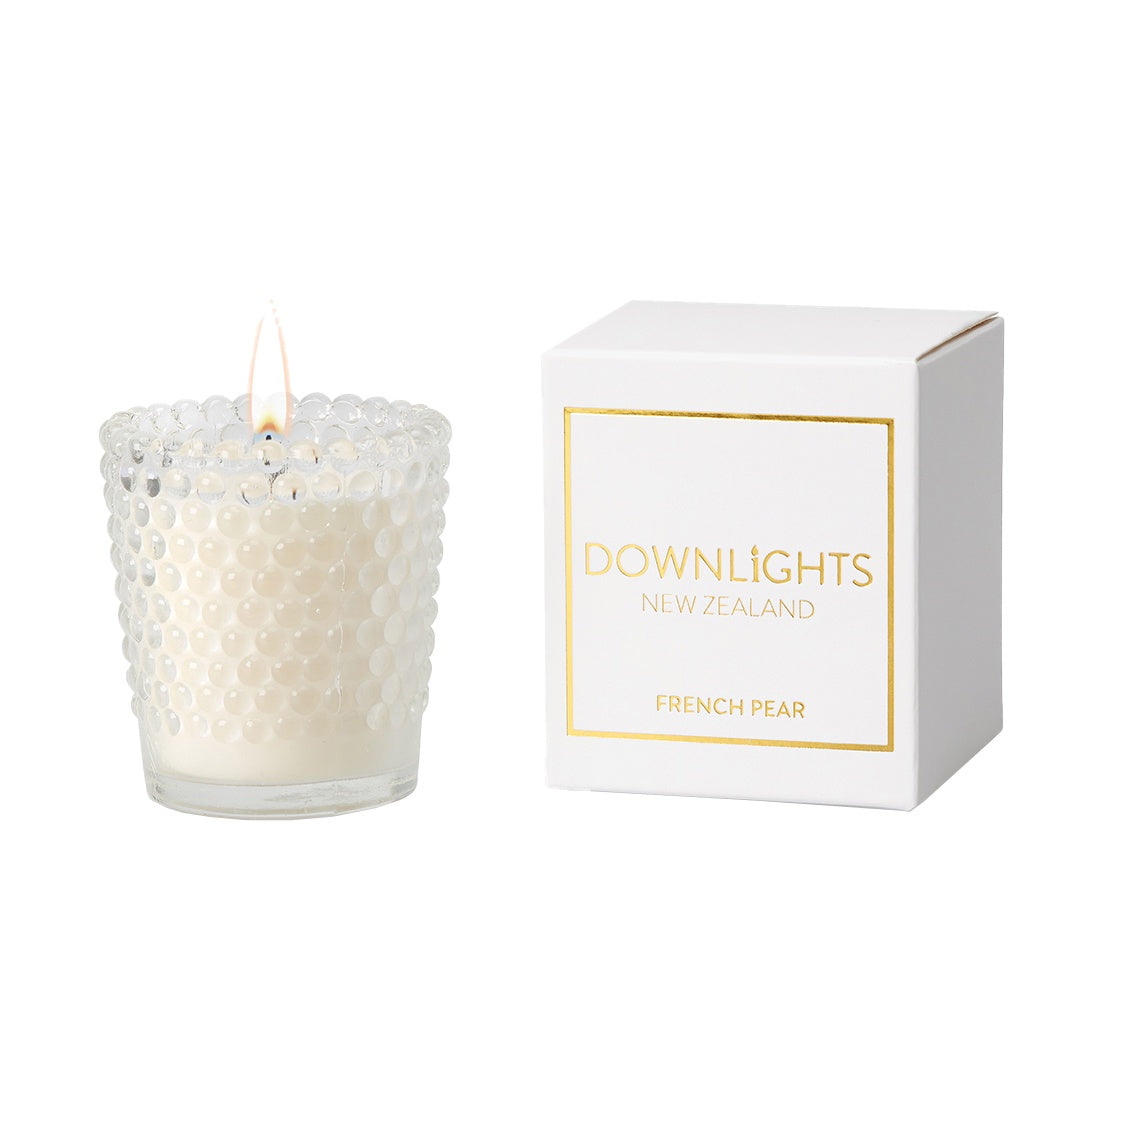 Downlights mini candle french pear